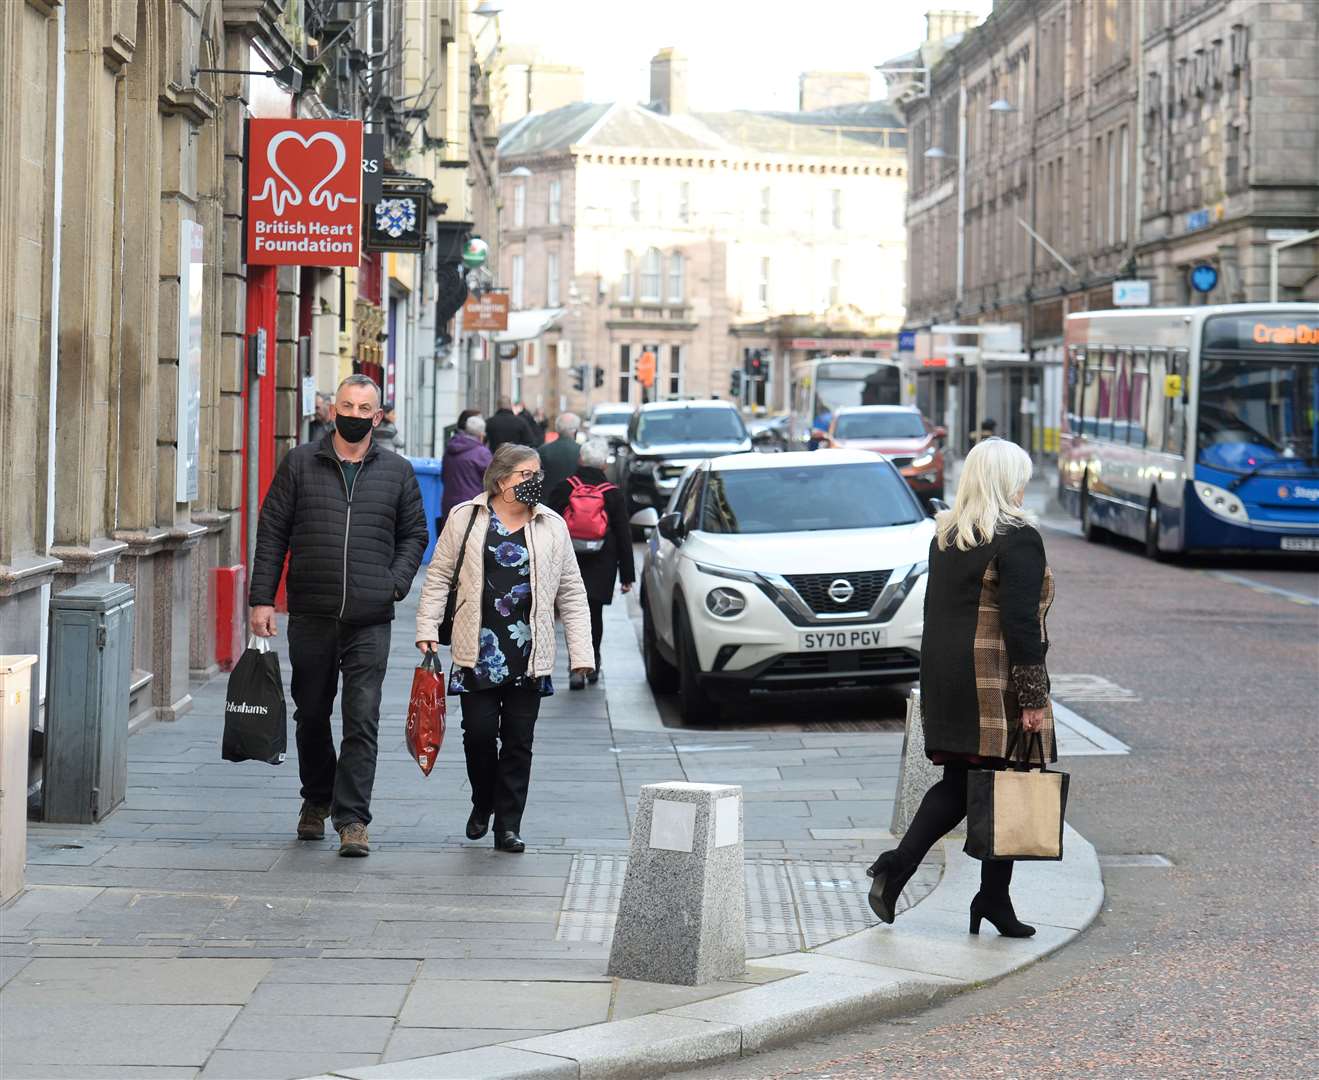 A call has been made to investigate the possibility of making Union Street a pedestrian area.